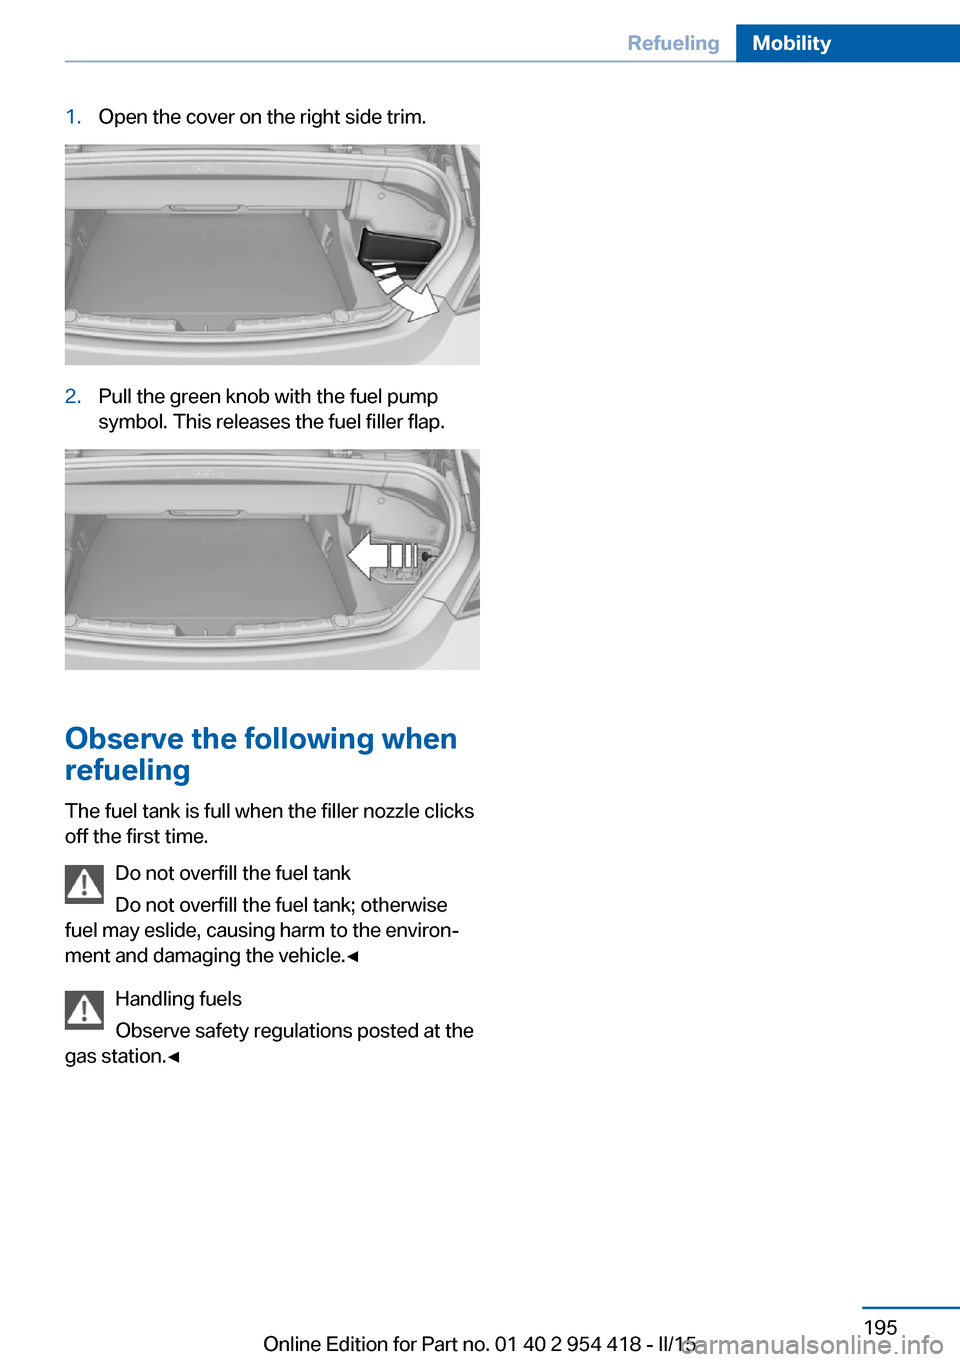 BMW 6 SERIES CONVERTIBLE 2016 F12 Owners Manual 1.Open the cover on the right side trim.2.Pull the green knob with the fuel pump
symbol. This releases the fuel filler flap.
Observe the following when
refueling
The fuel tank is full when the filler 